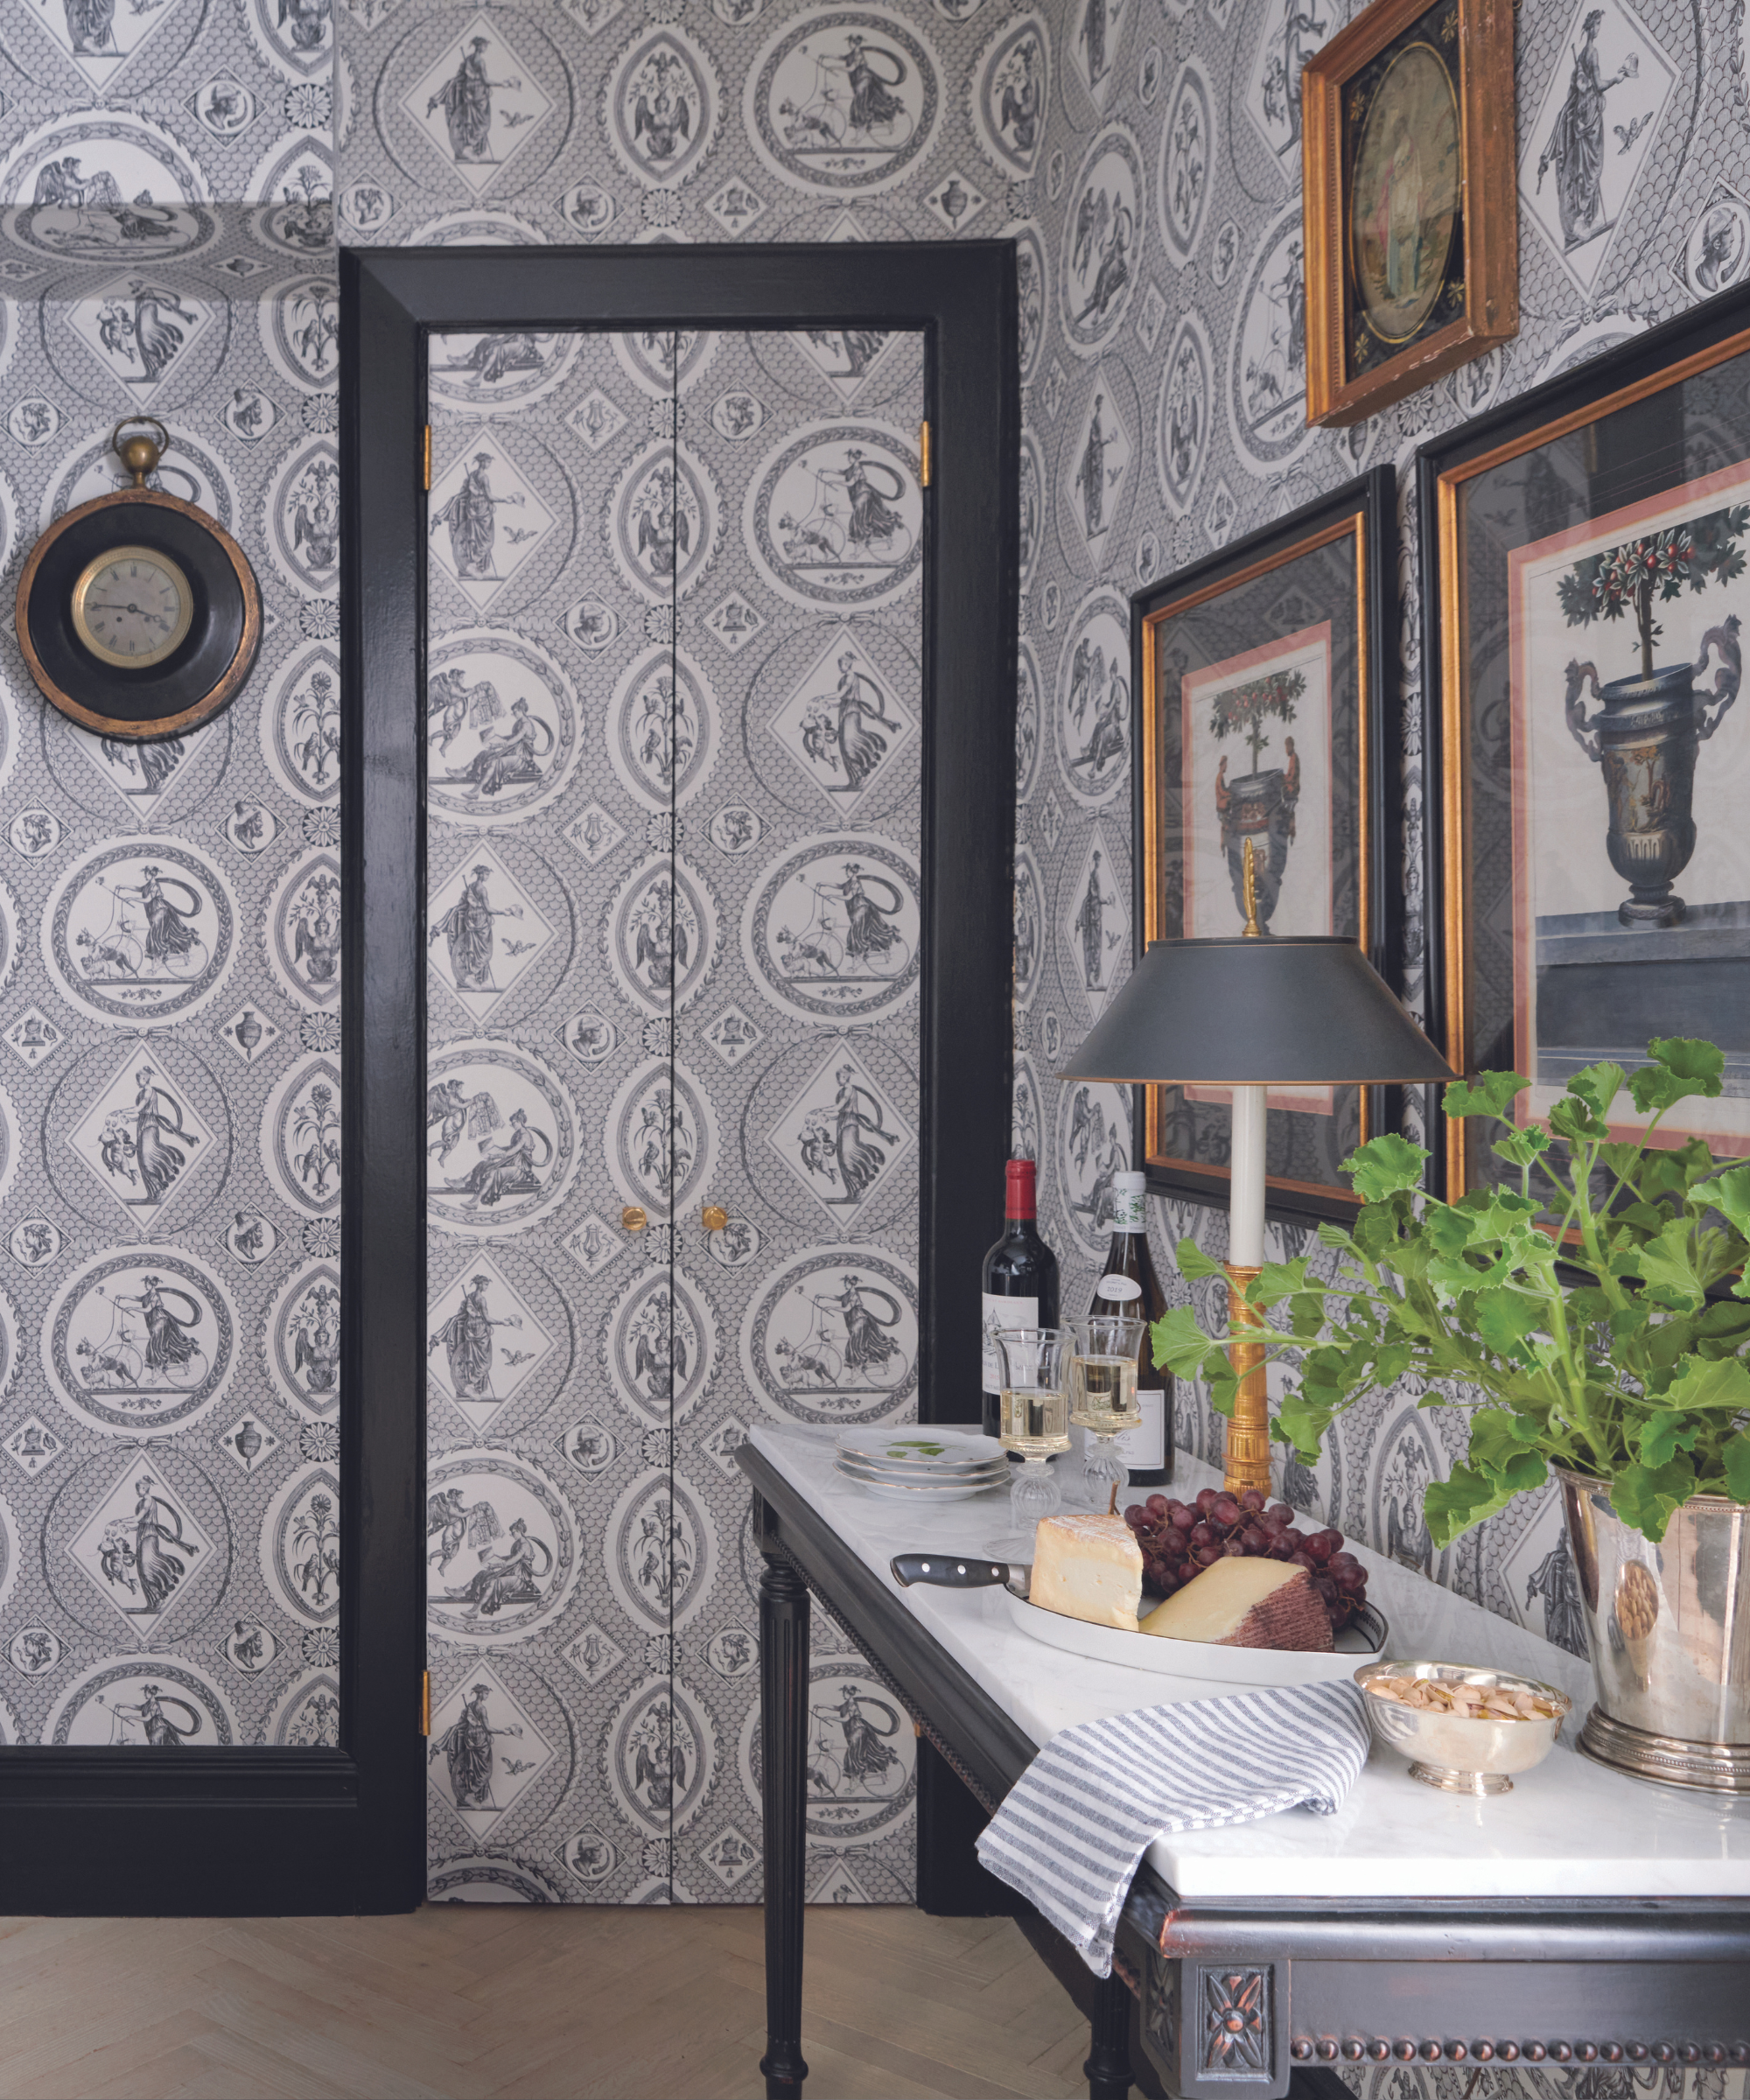 toile wallpaper in kitchen with sideboard and art on walls